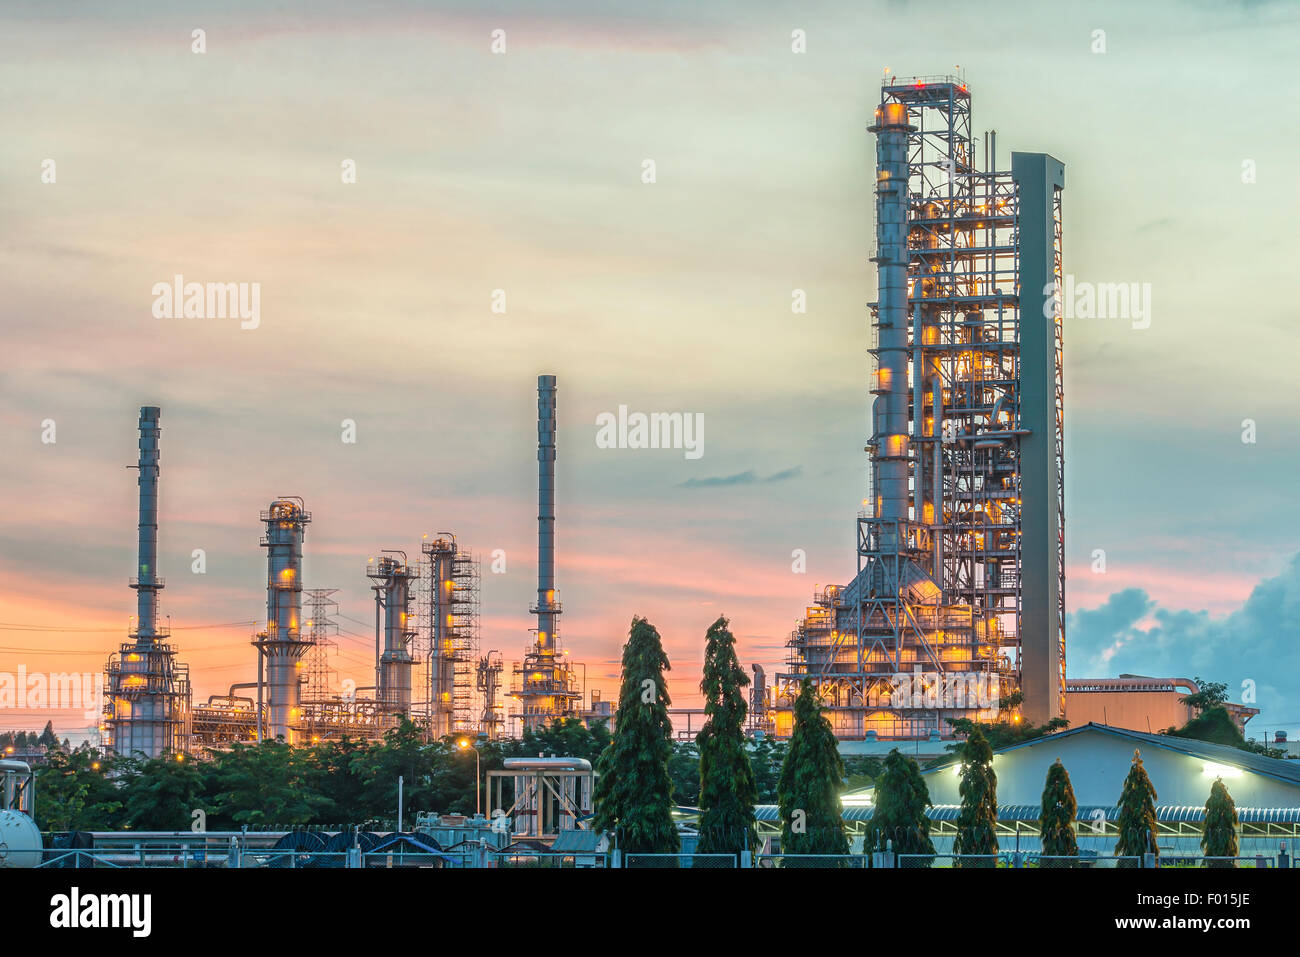 Oil and gas refinery in night, Thailand Stock Photo